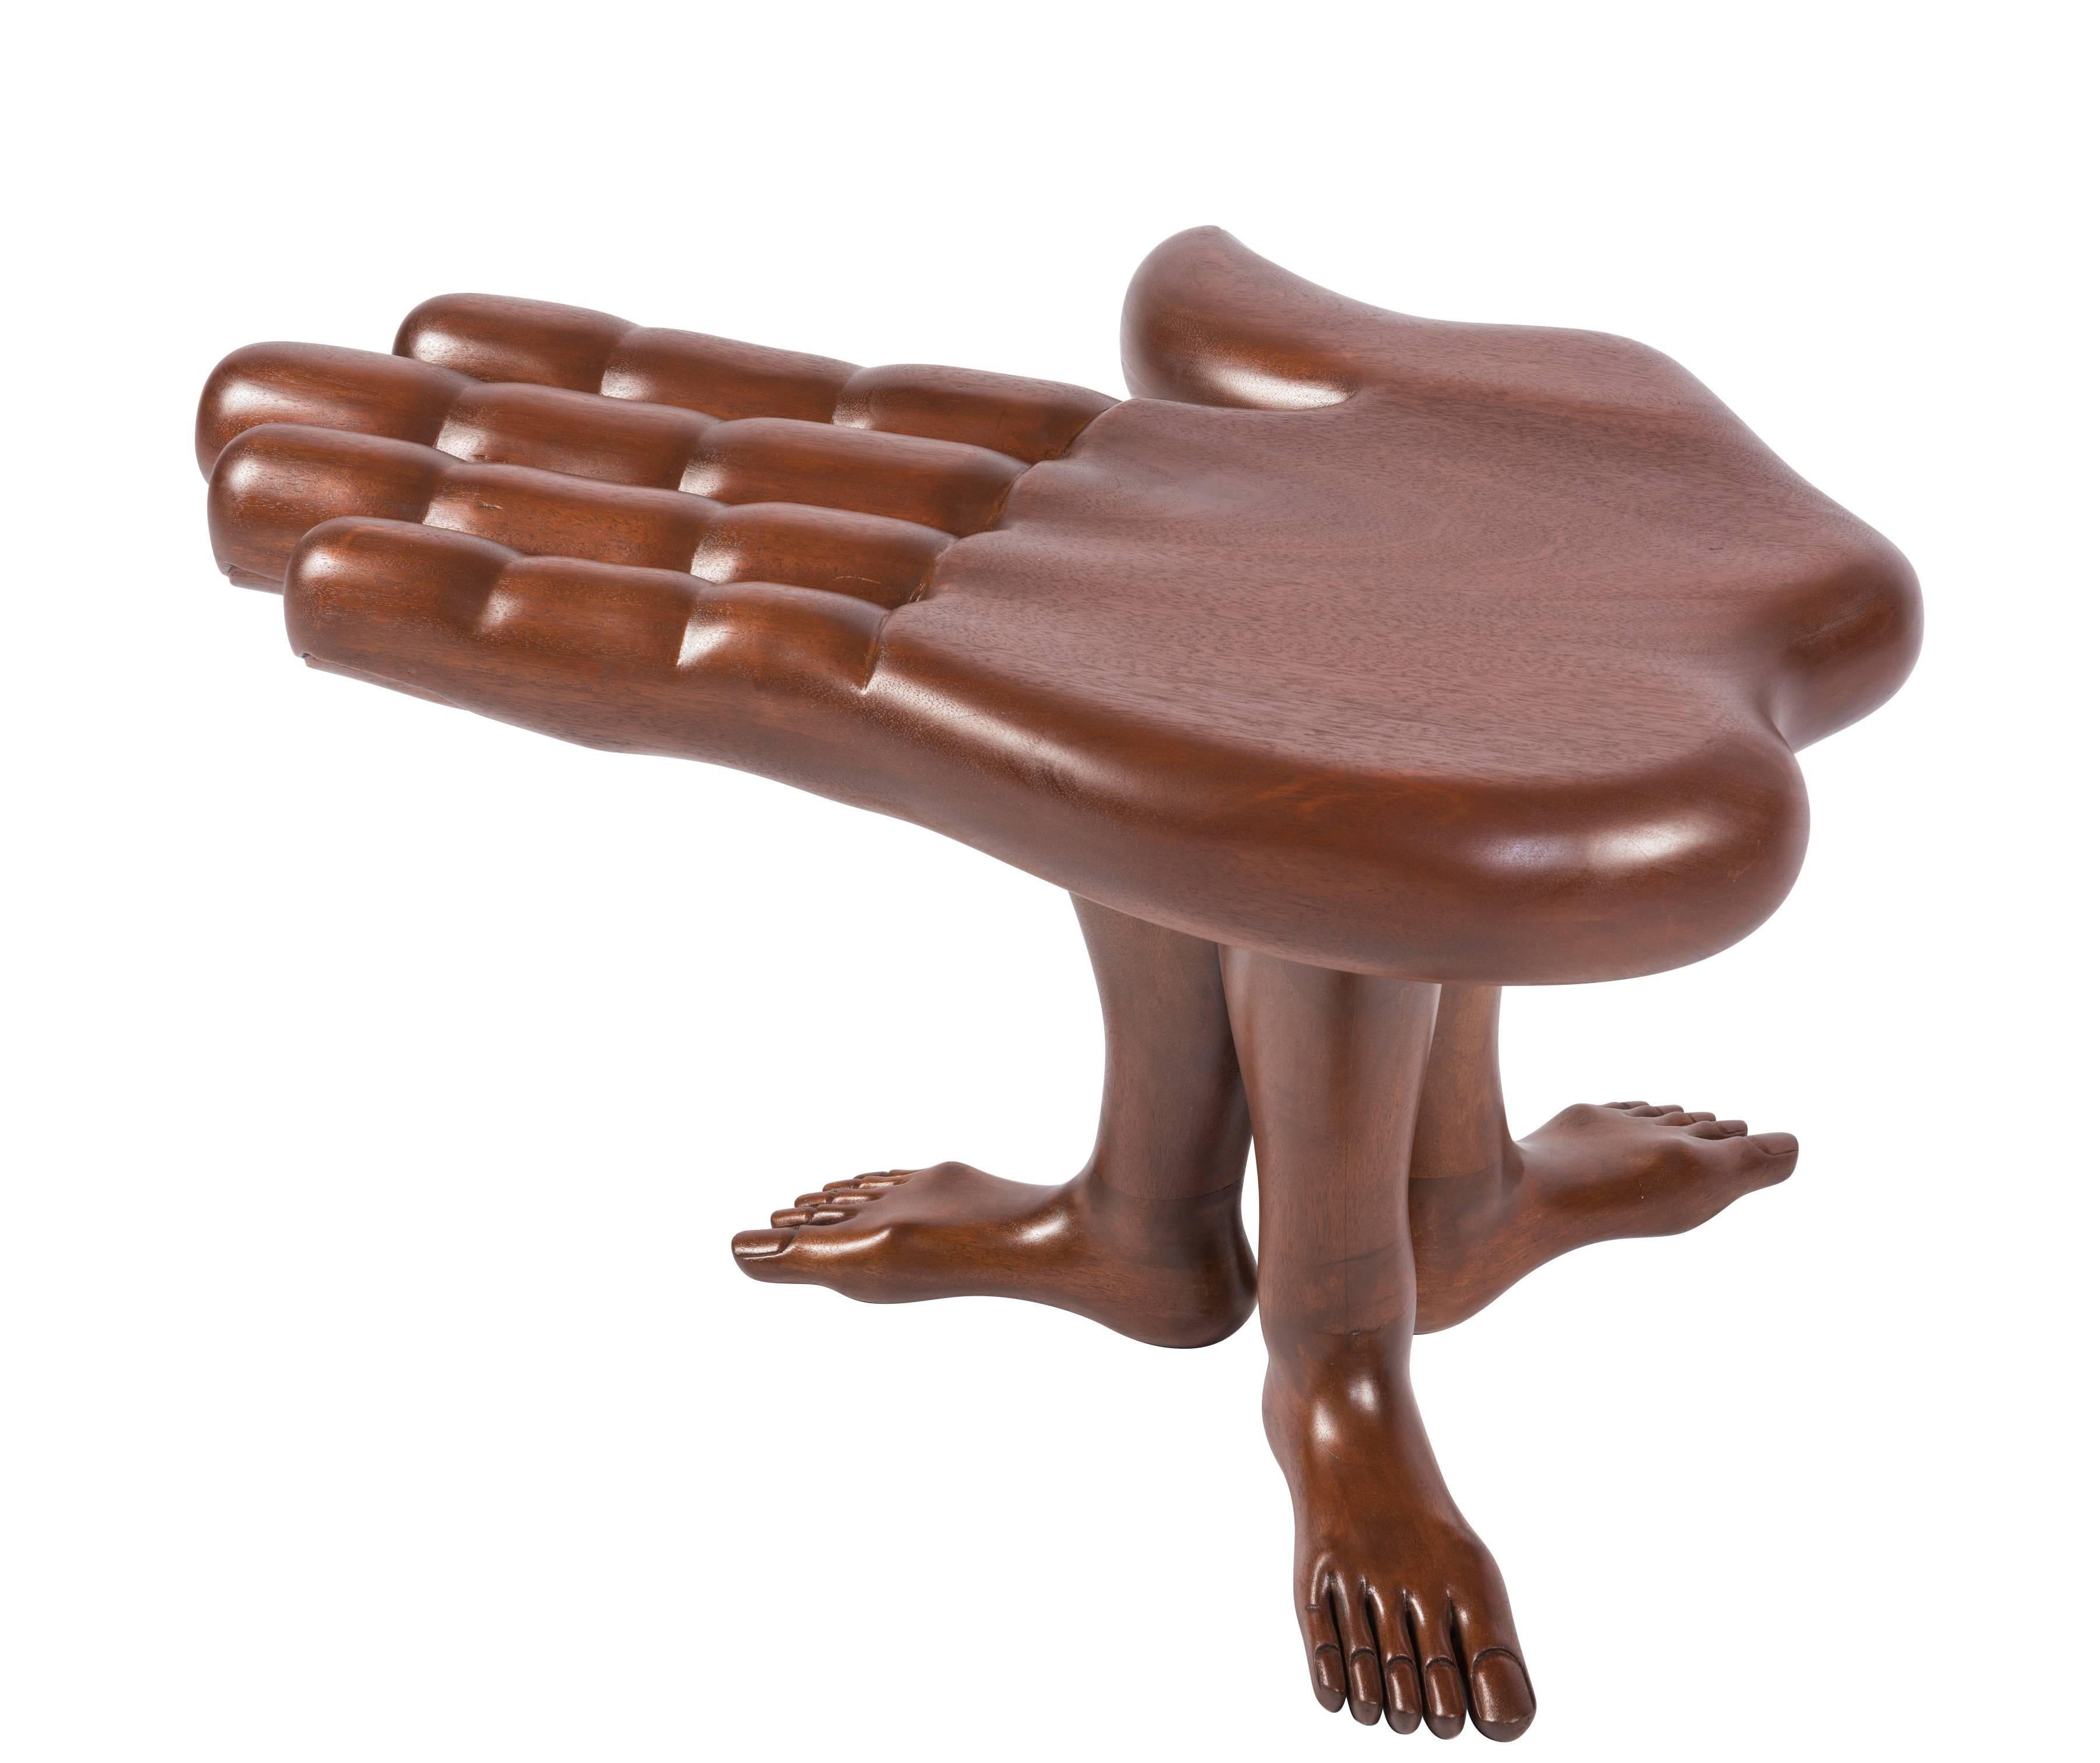 A rare hand and foot table or stool designed and made by Mexican Surrealist artist Pedro Friedeberg in his iconic hand and leg motif. Made of laminated and blocked mahogany, this table/stool features a palm supported by three legs and feet. Signed